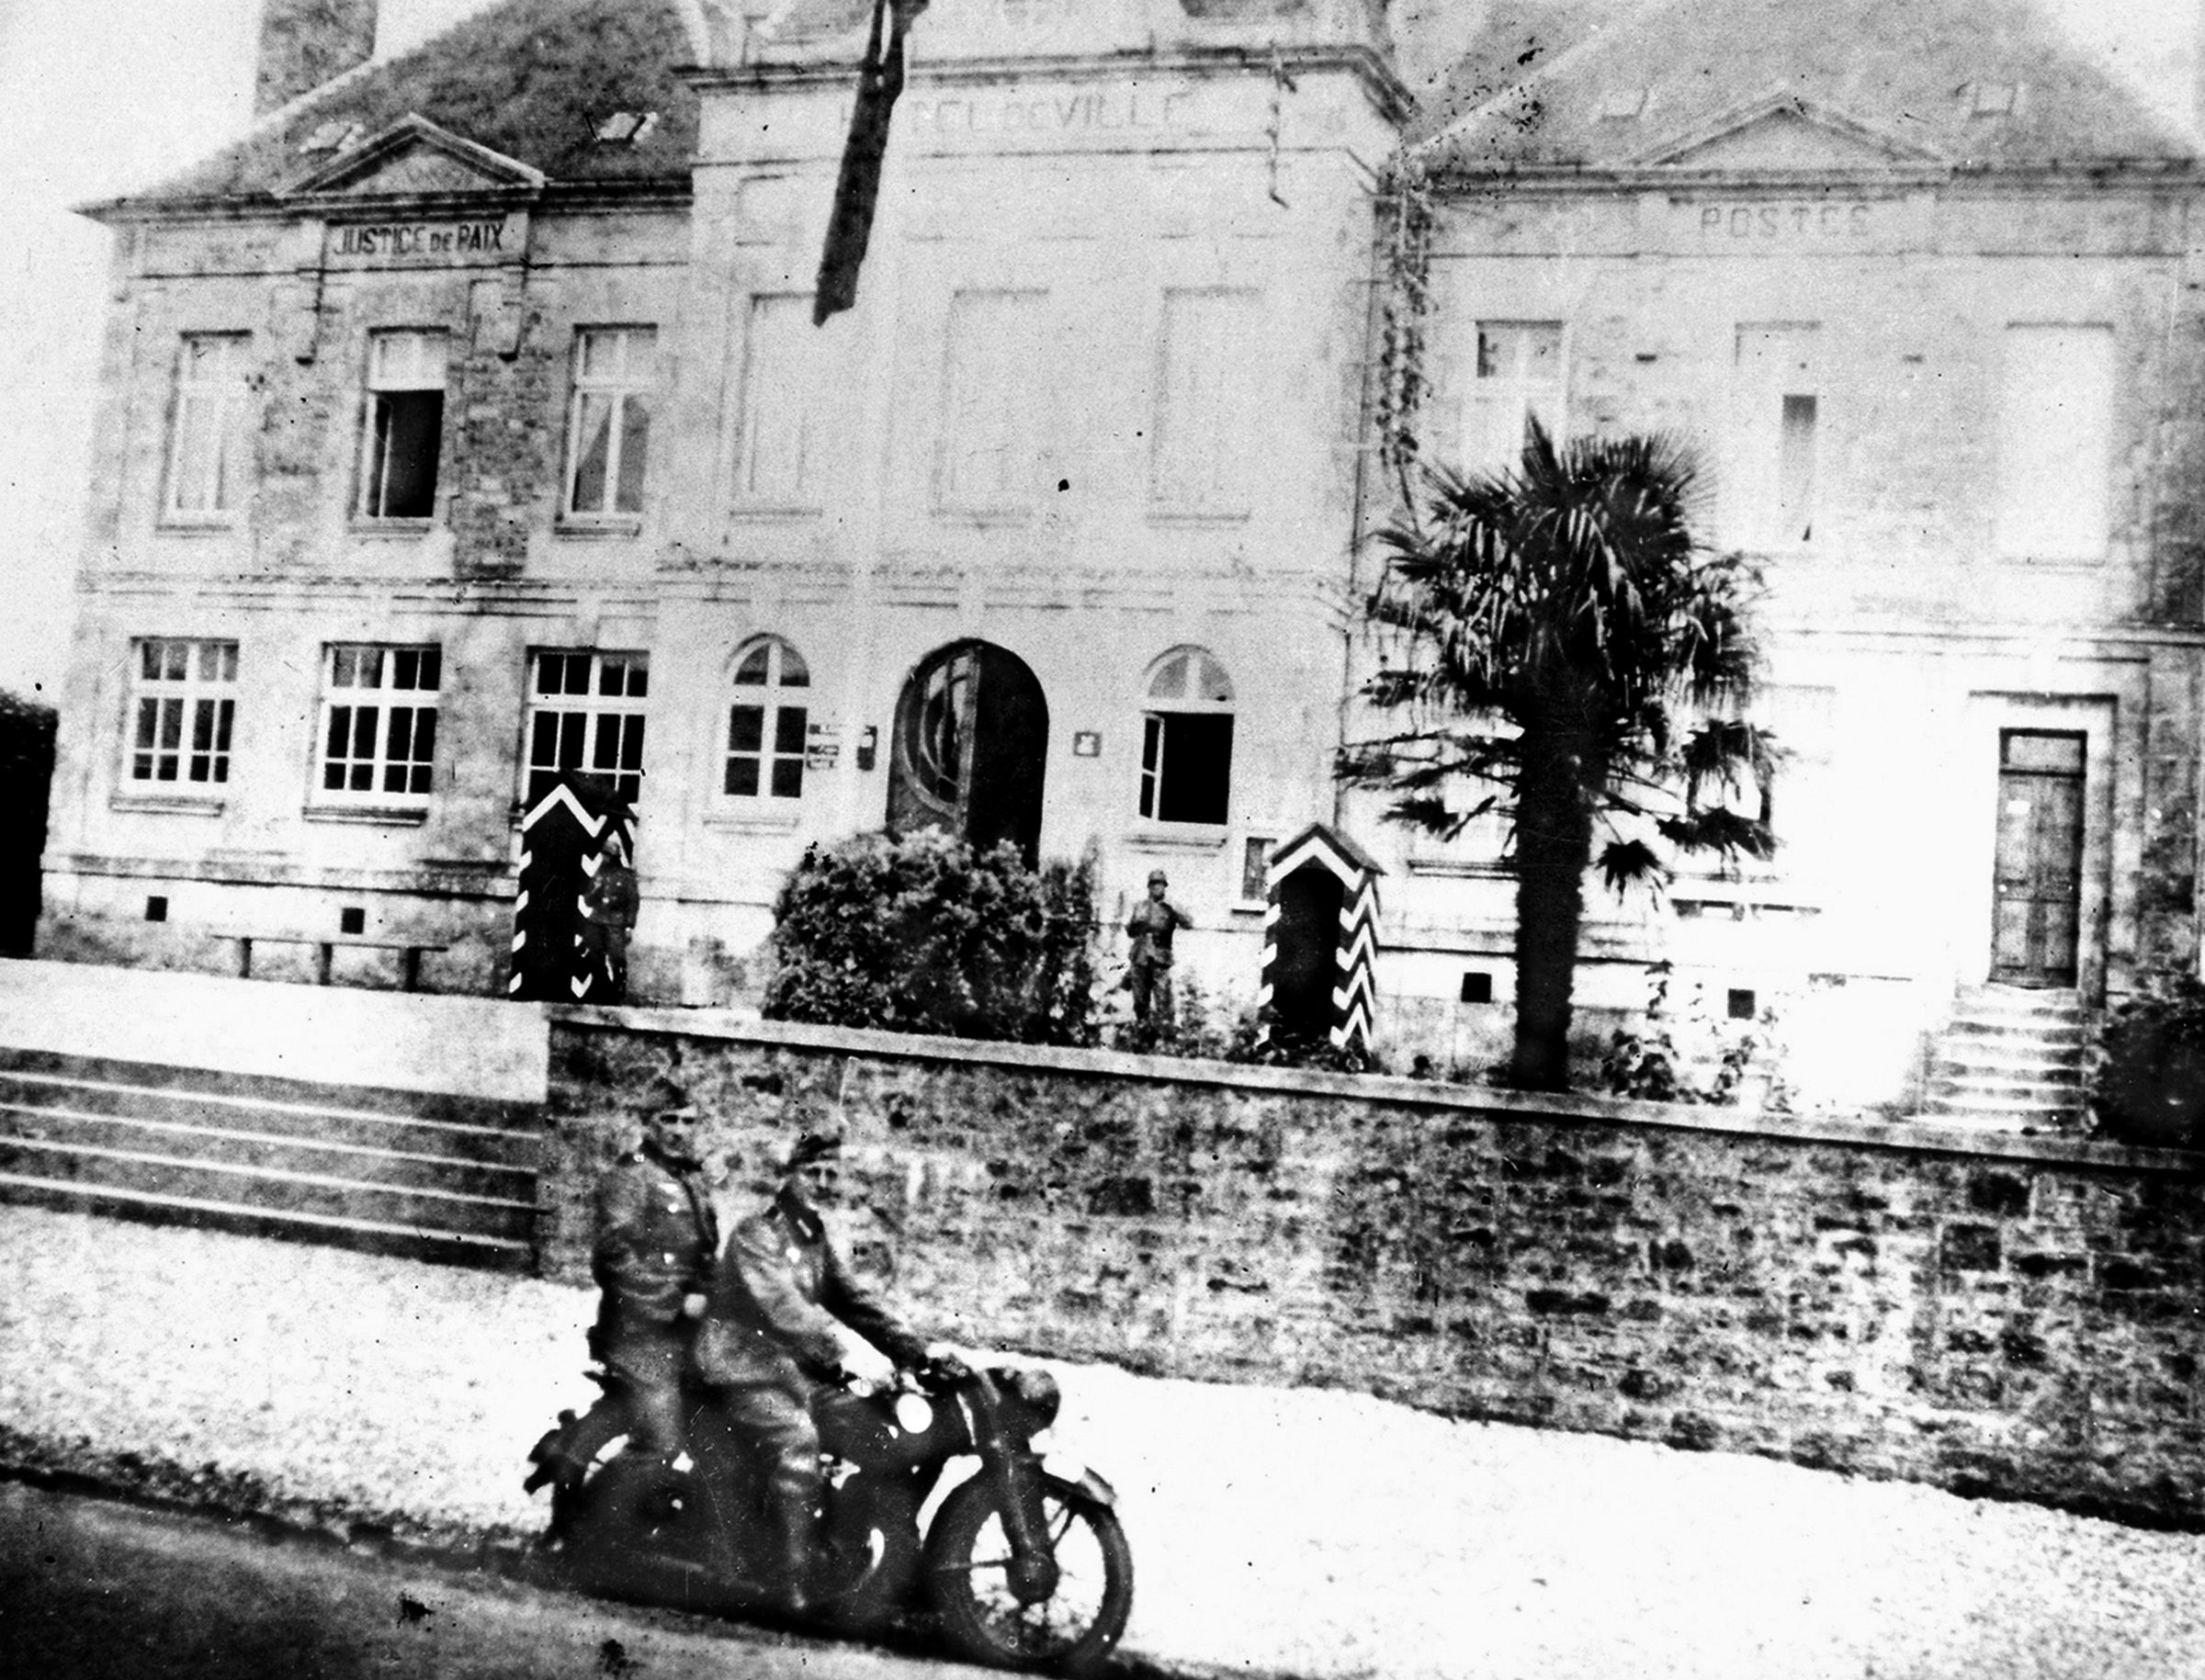 During the German occupation of Sainte-Mere-Eglise, two German soldiers on a motorcycle pose for the cameraman in front of city hall. 